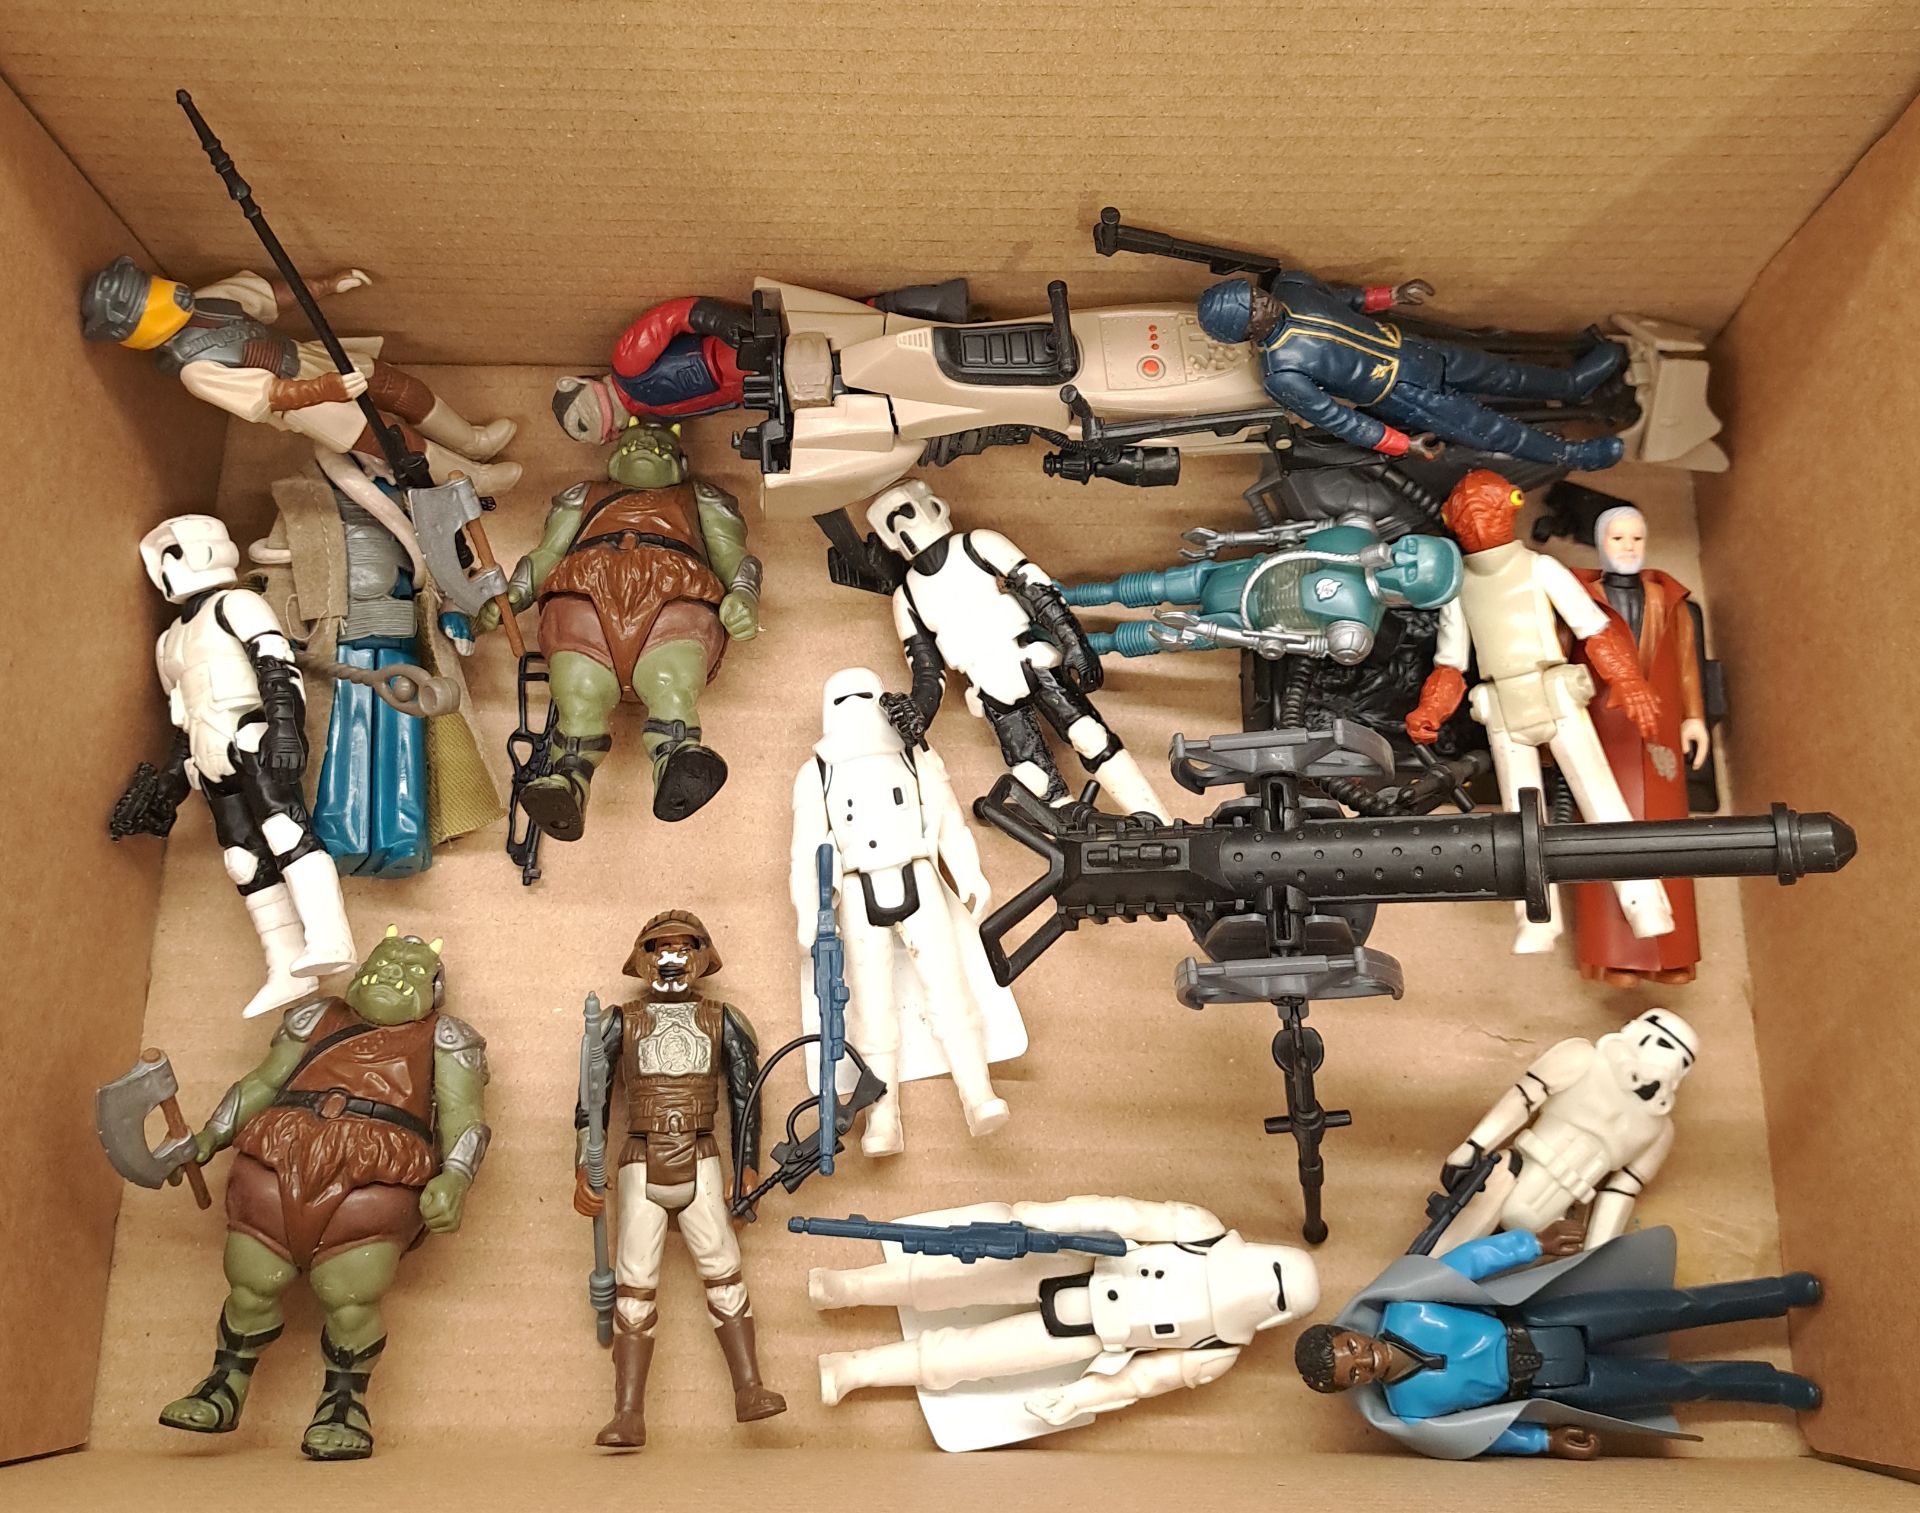 Quantity of Loose Kenner Star Wars 3 3/4" Action Figures & Vehicles